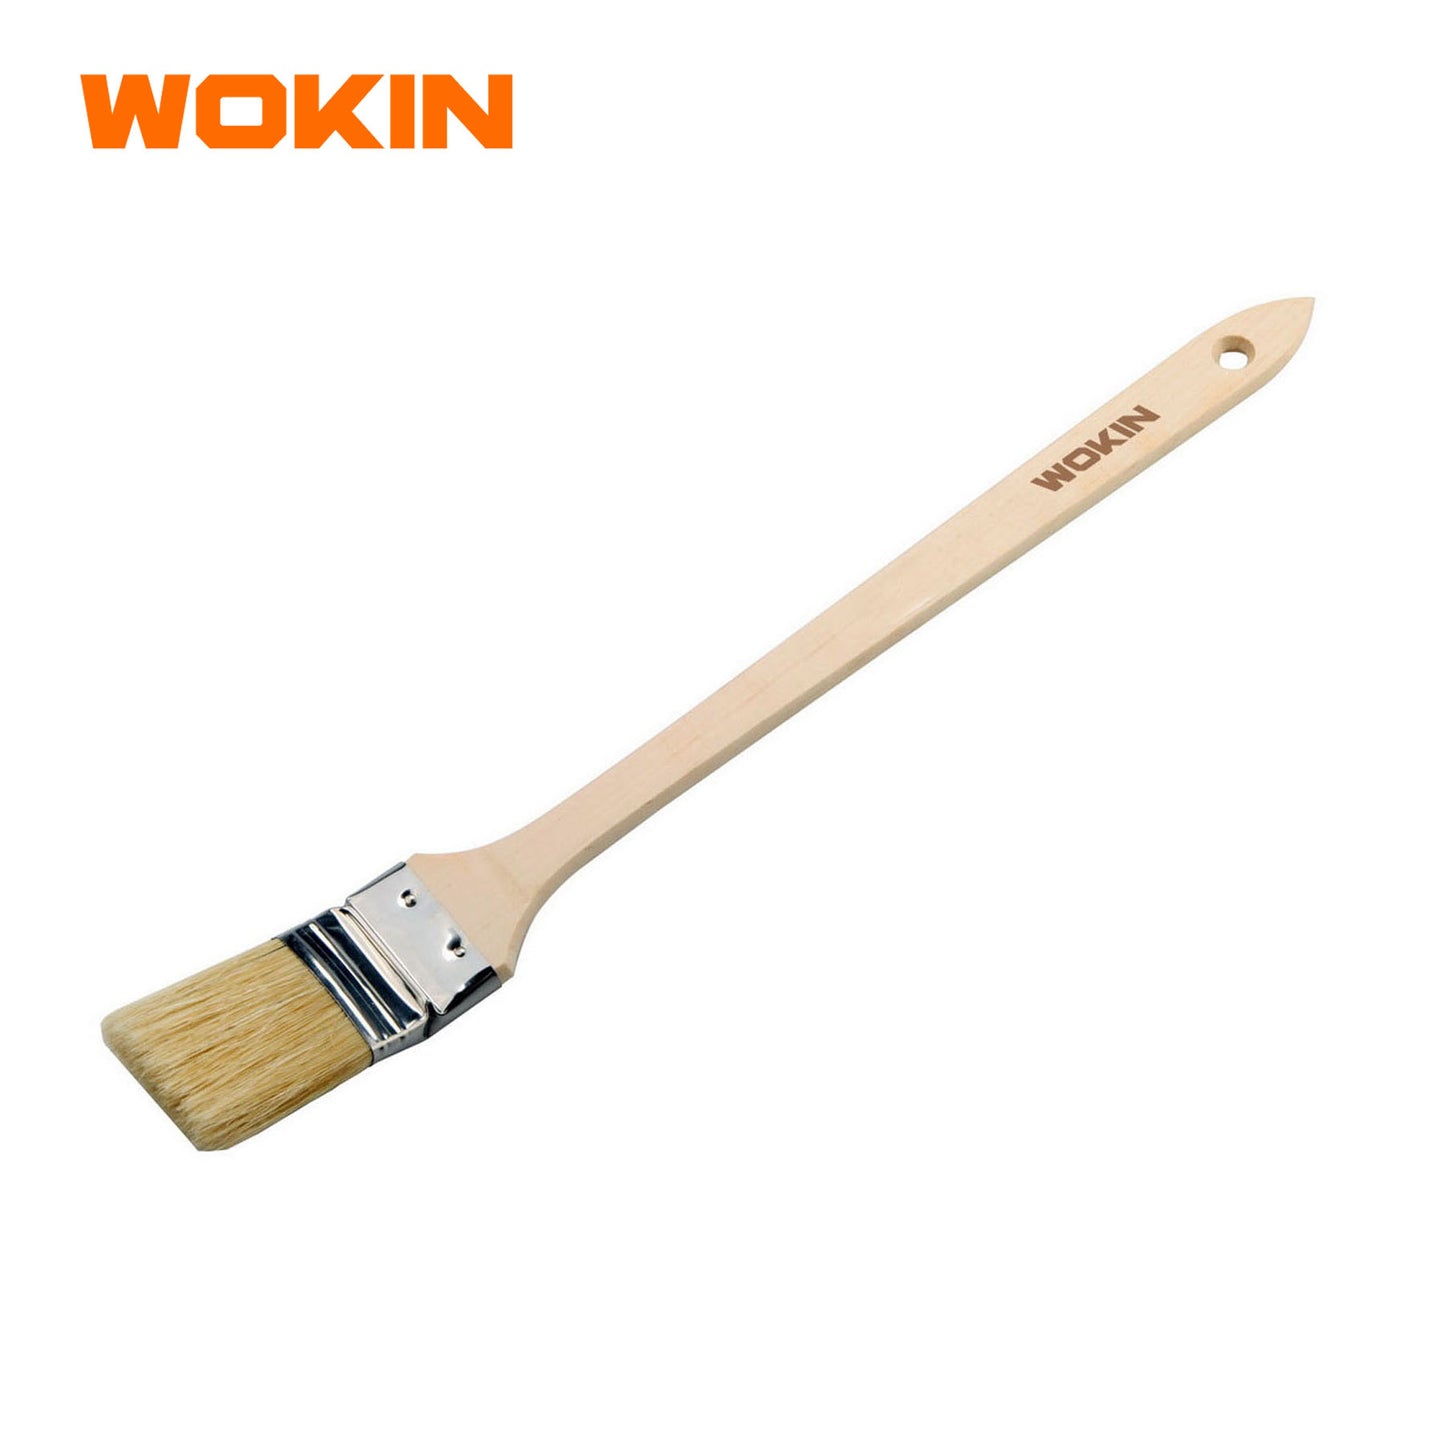 Wokin 2 Inch Curved Paint Brush